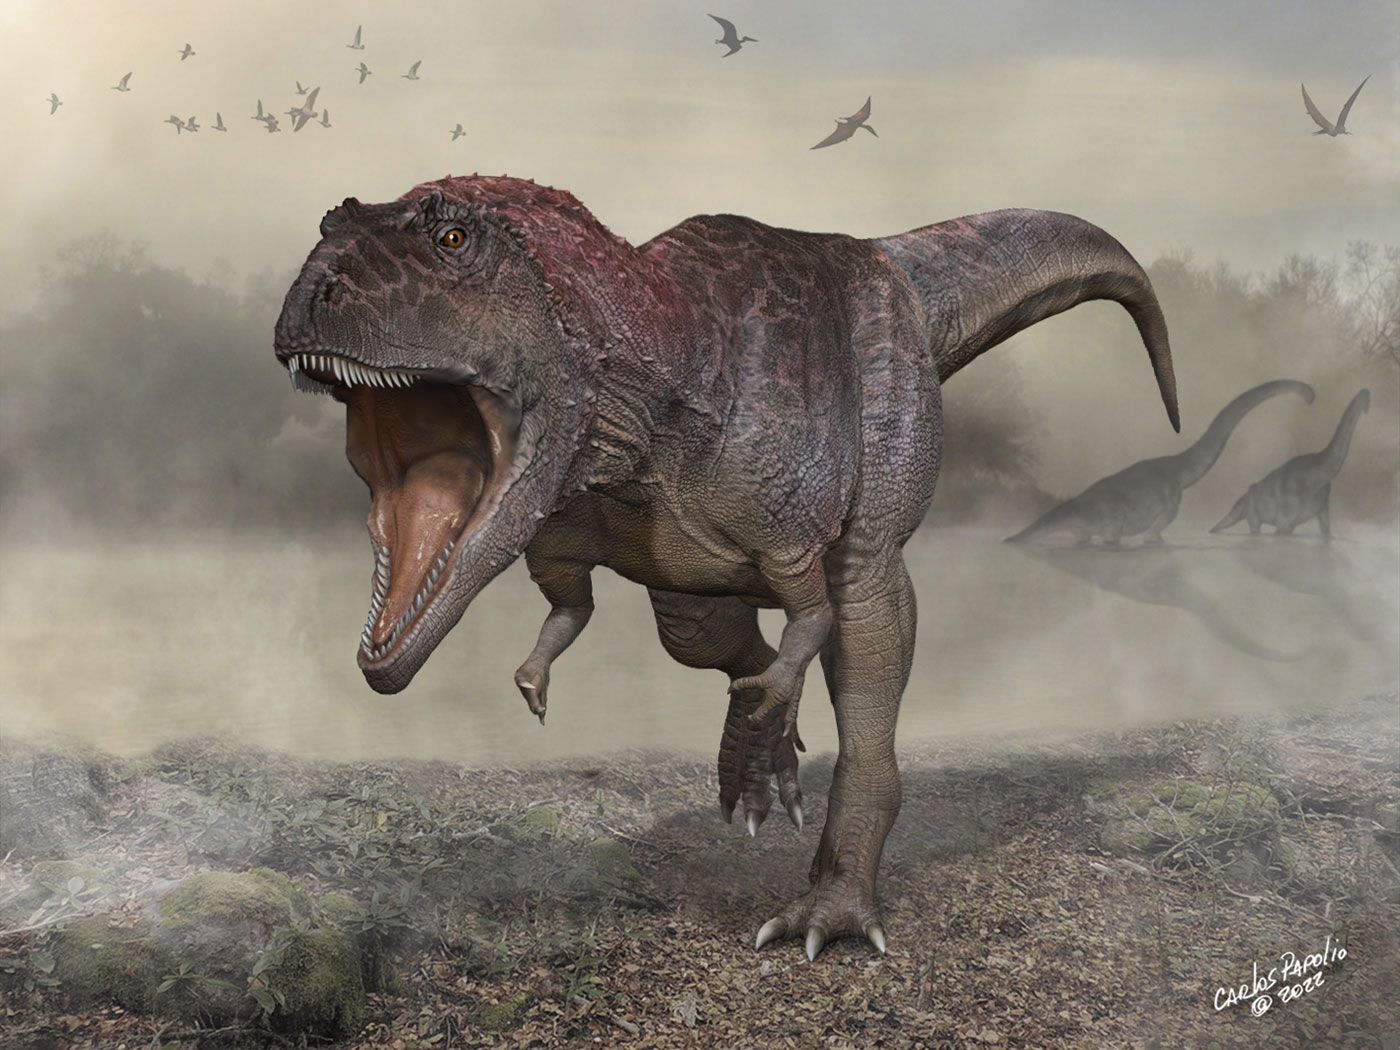 Paleontologists Uncover New Dinosaur With Small Arms Like T. Rex